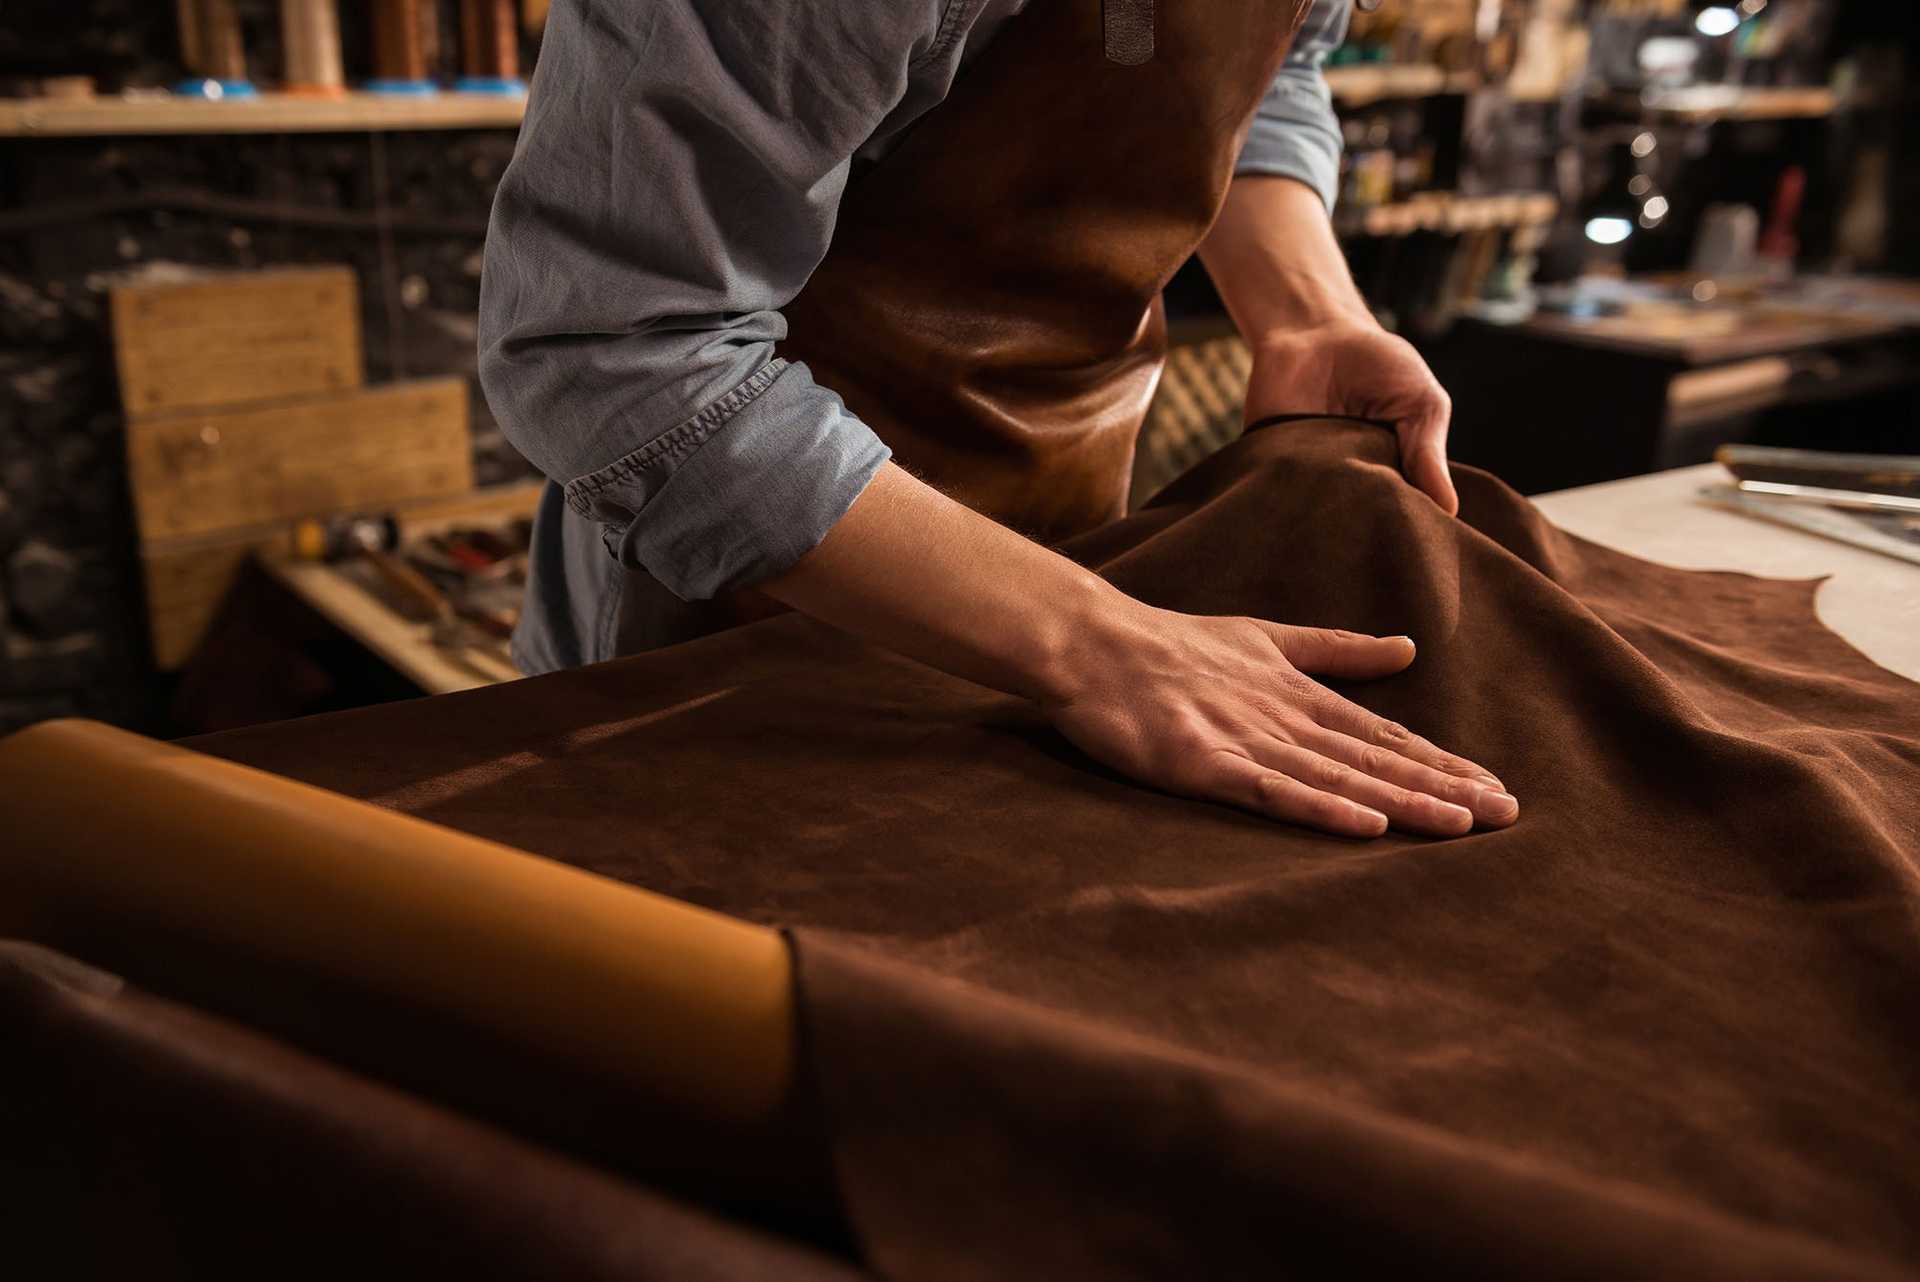 Leather worker stroking his hand over leather garment.